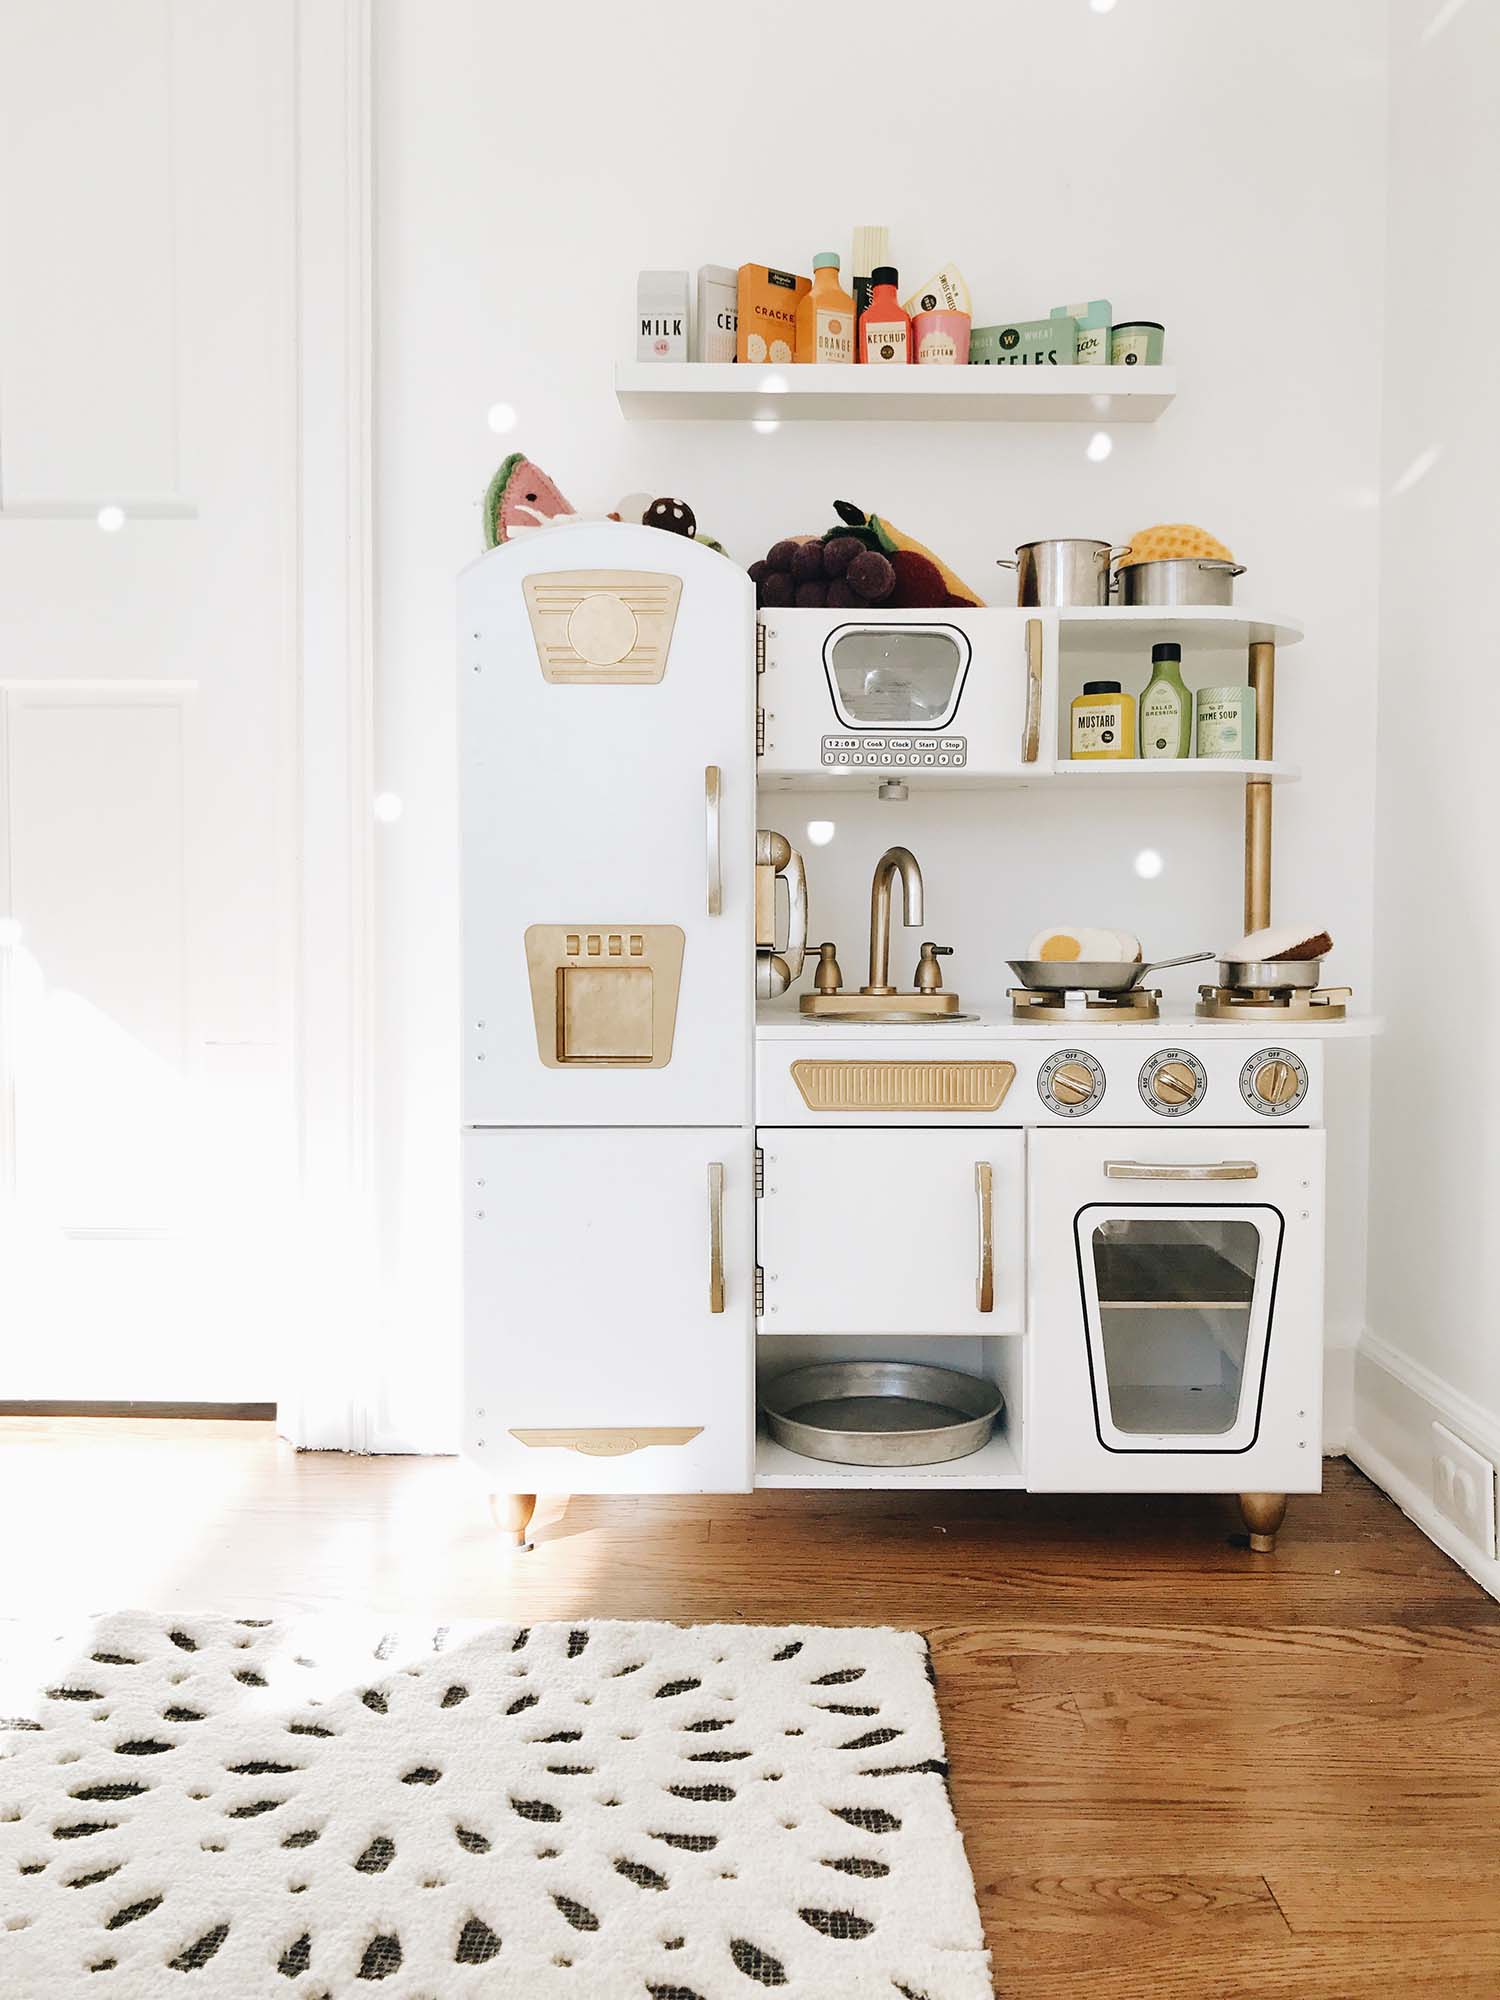 8 OF THE BEST PLAY KITCHENS FOR TODDLERS — WINTER DAISY | Melissa Barling, Kids' Interior